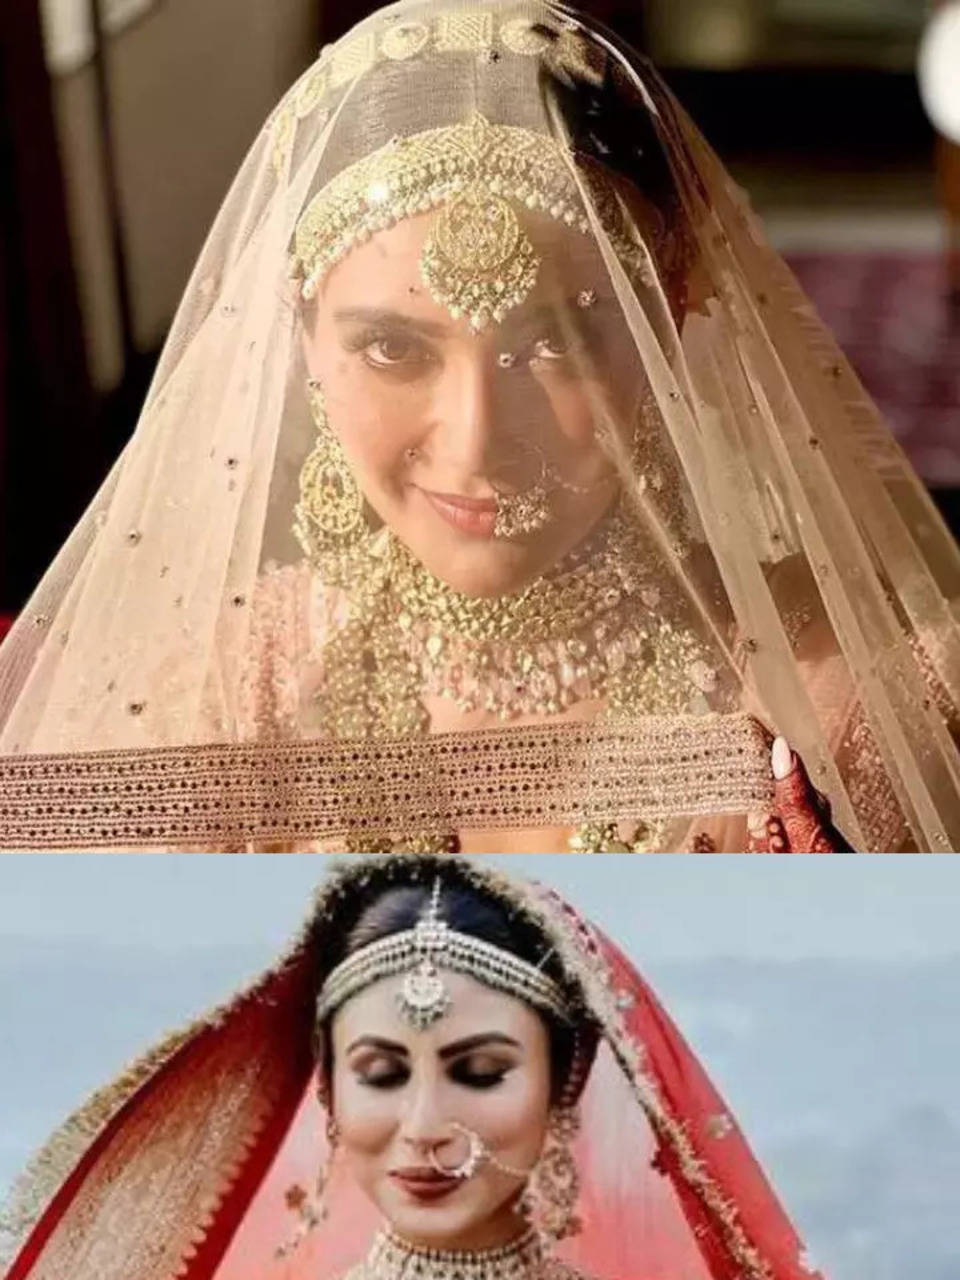 Nude Mouni Roy - From Karishma Tanna to Mouni Roy: Bridal makeup inspiration from these  stunning new brides | Times of India